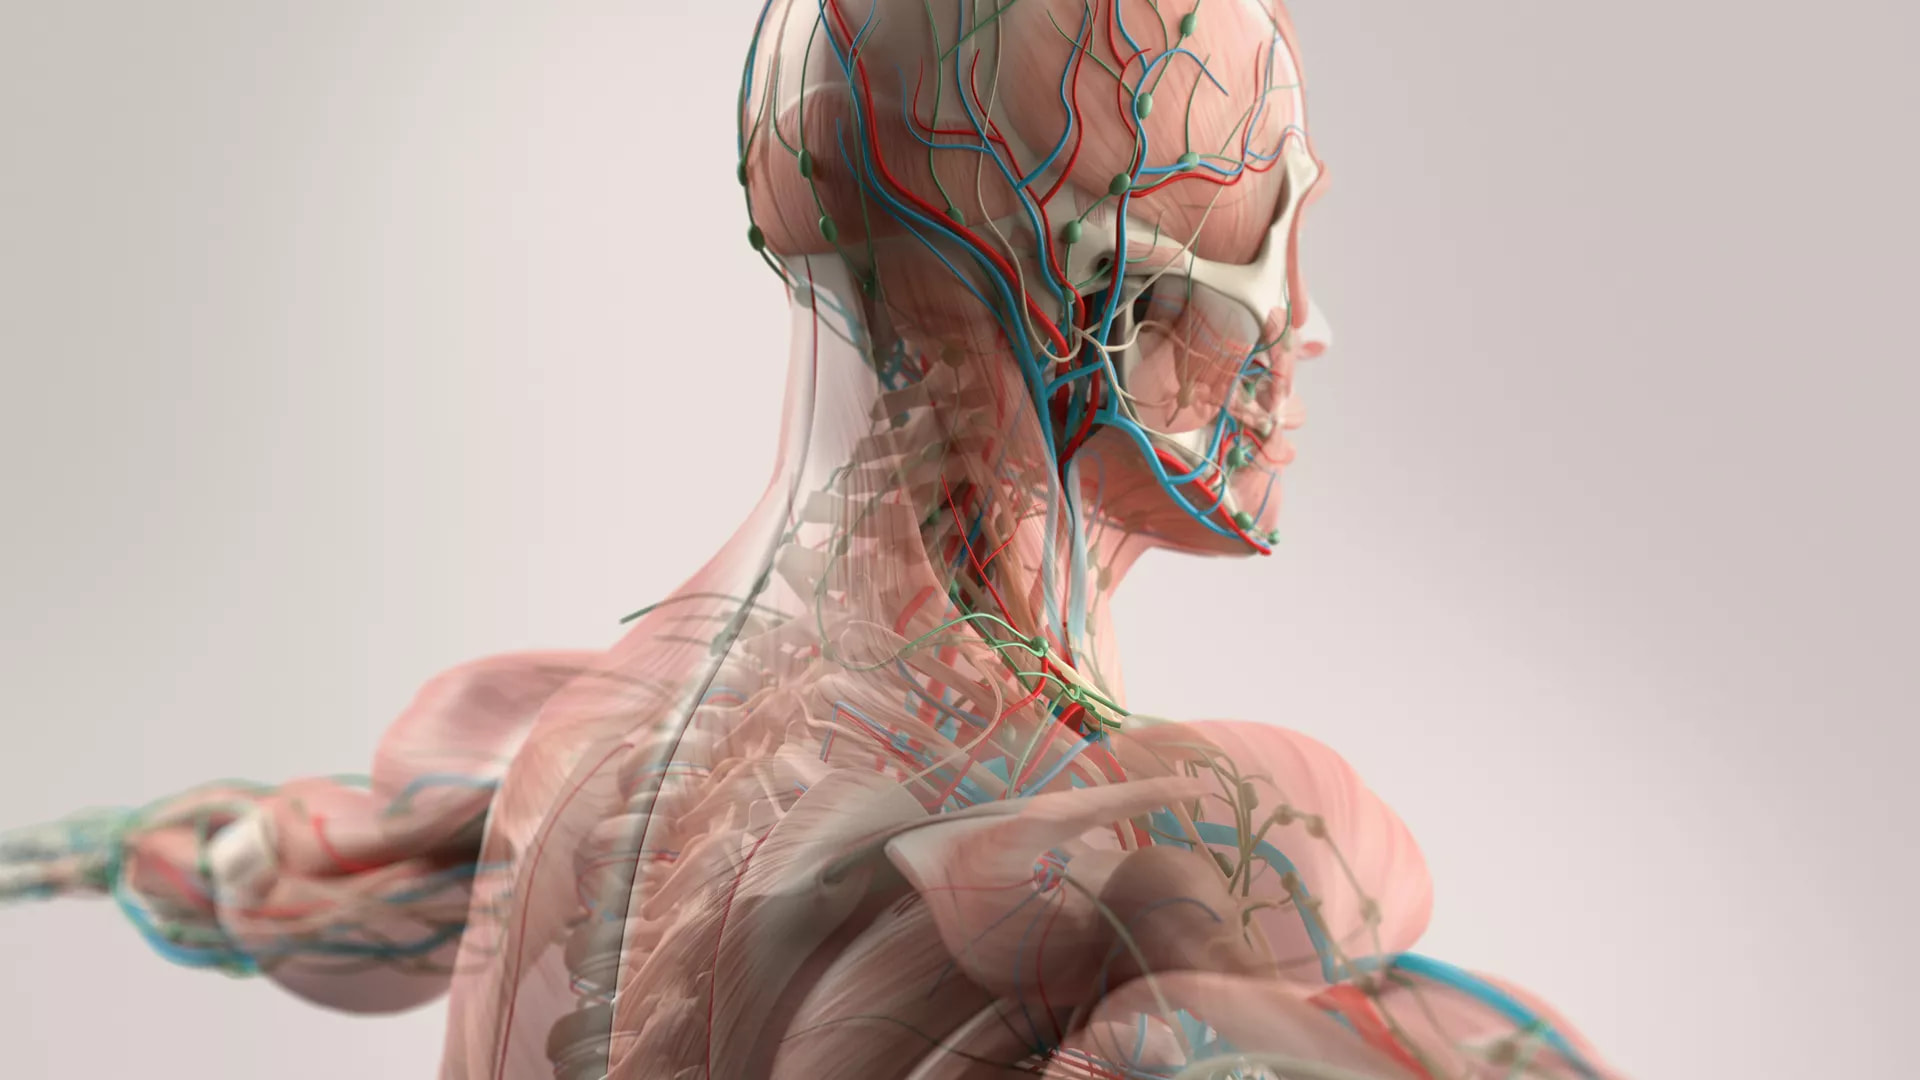 Cover image for "Modeling of Cardiovascular Systems"